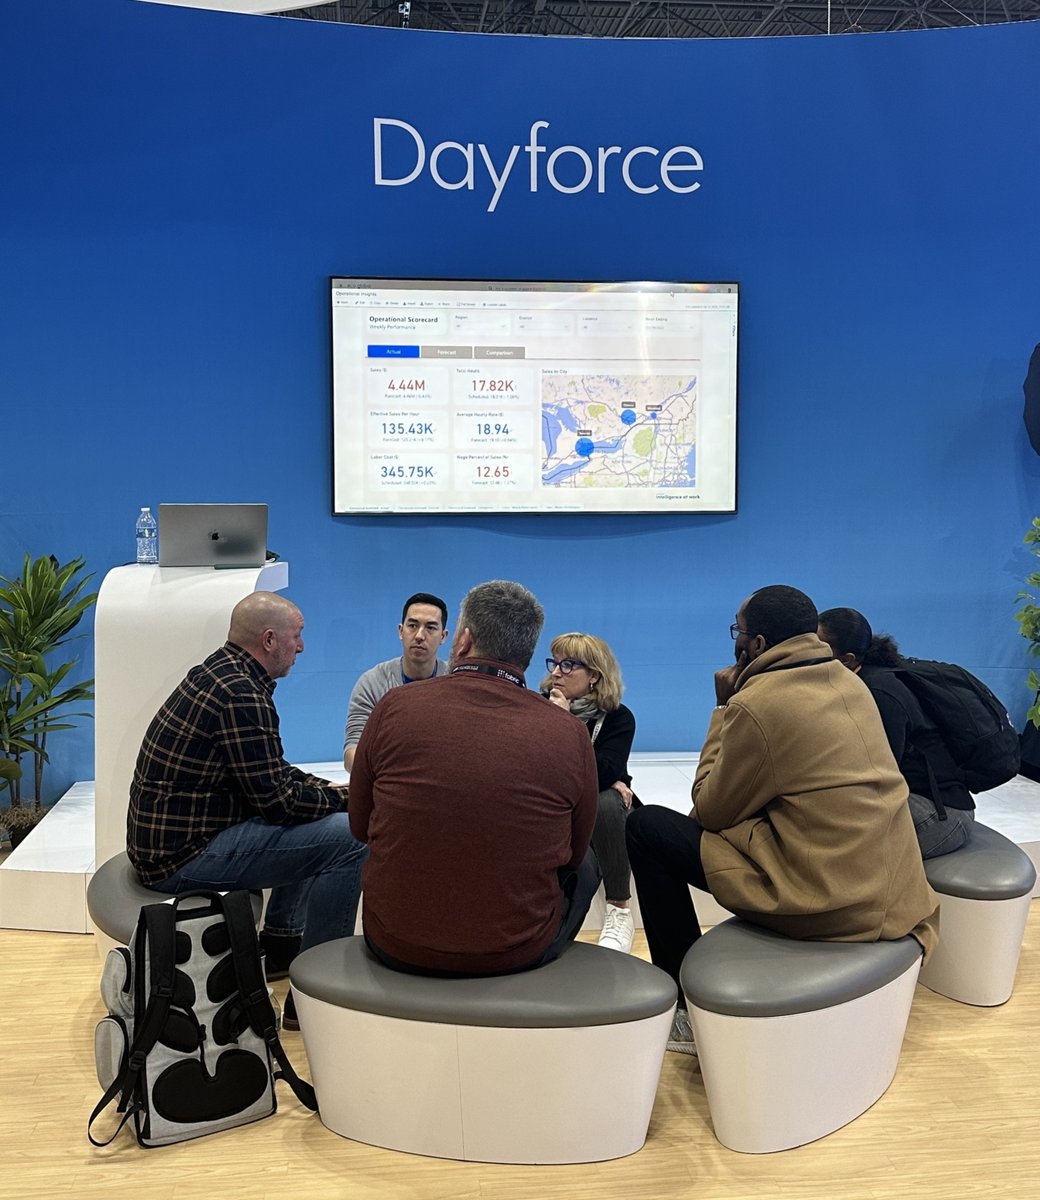 And that’s a wrap! Thank you to everyone who stopped by our booth to learn more about Dayforce during #NRF2024. We’re grateful for the opportunity to make new connections and demonstrate how we make work life better for retail and hospitality leaders.